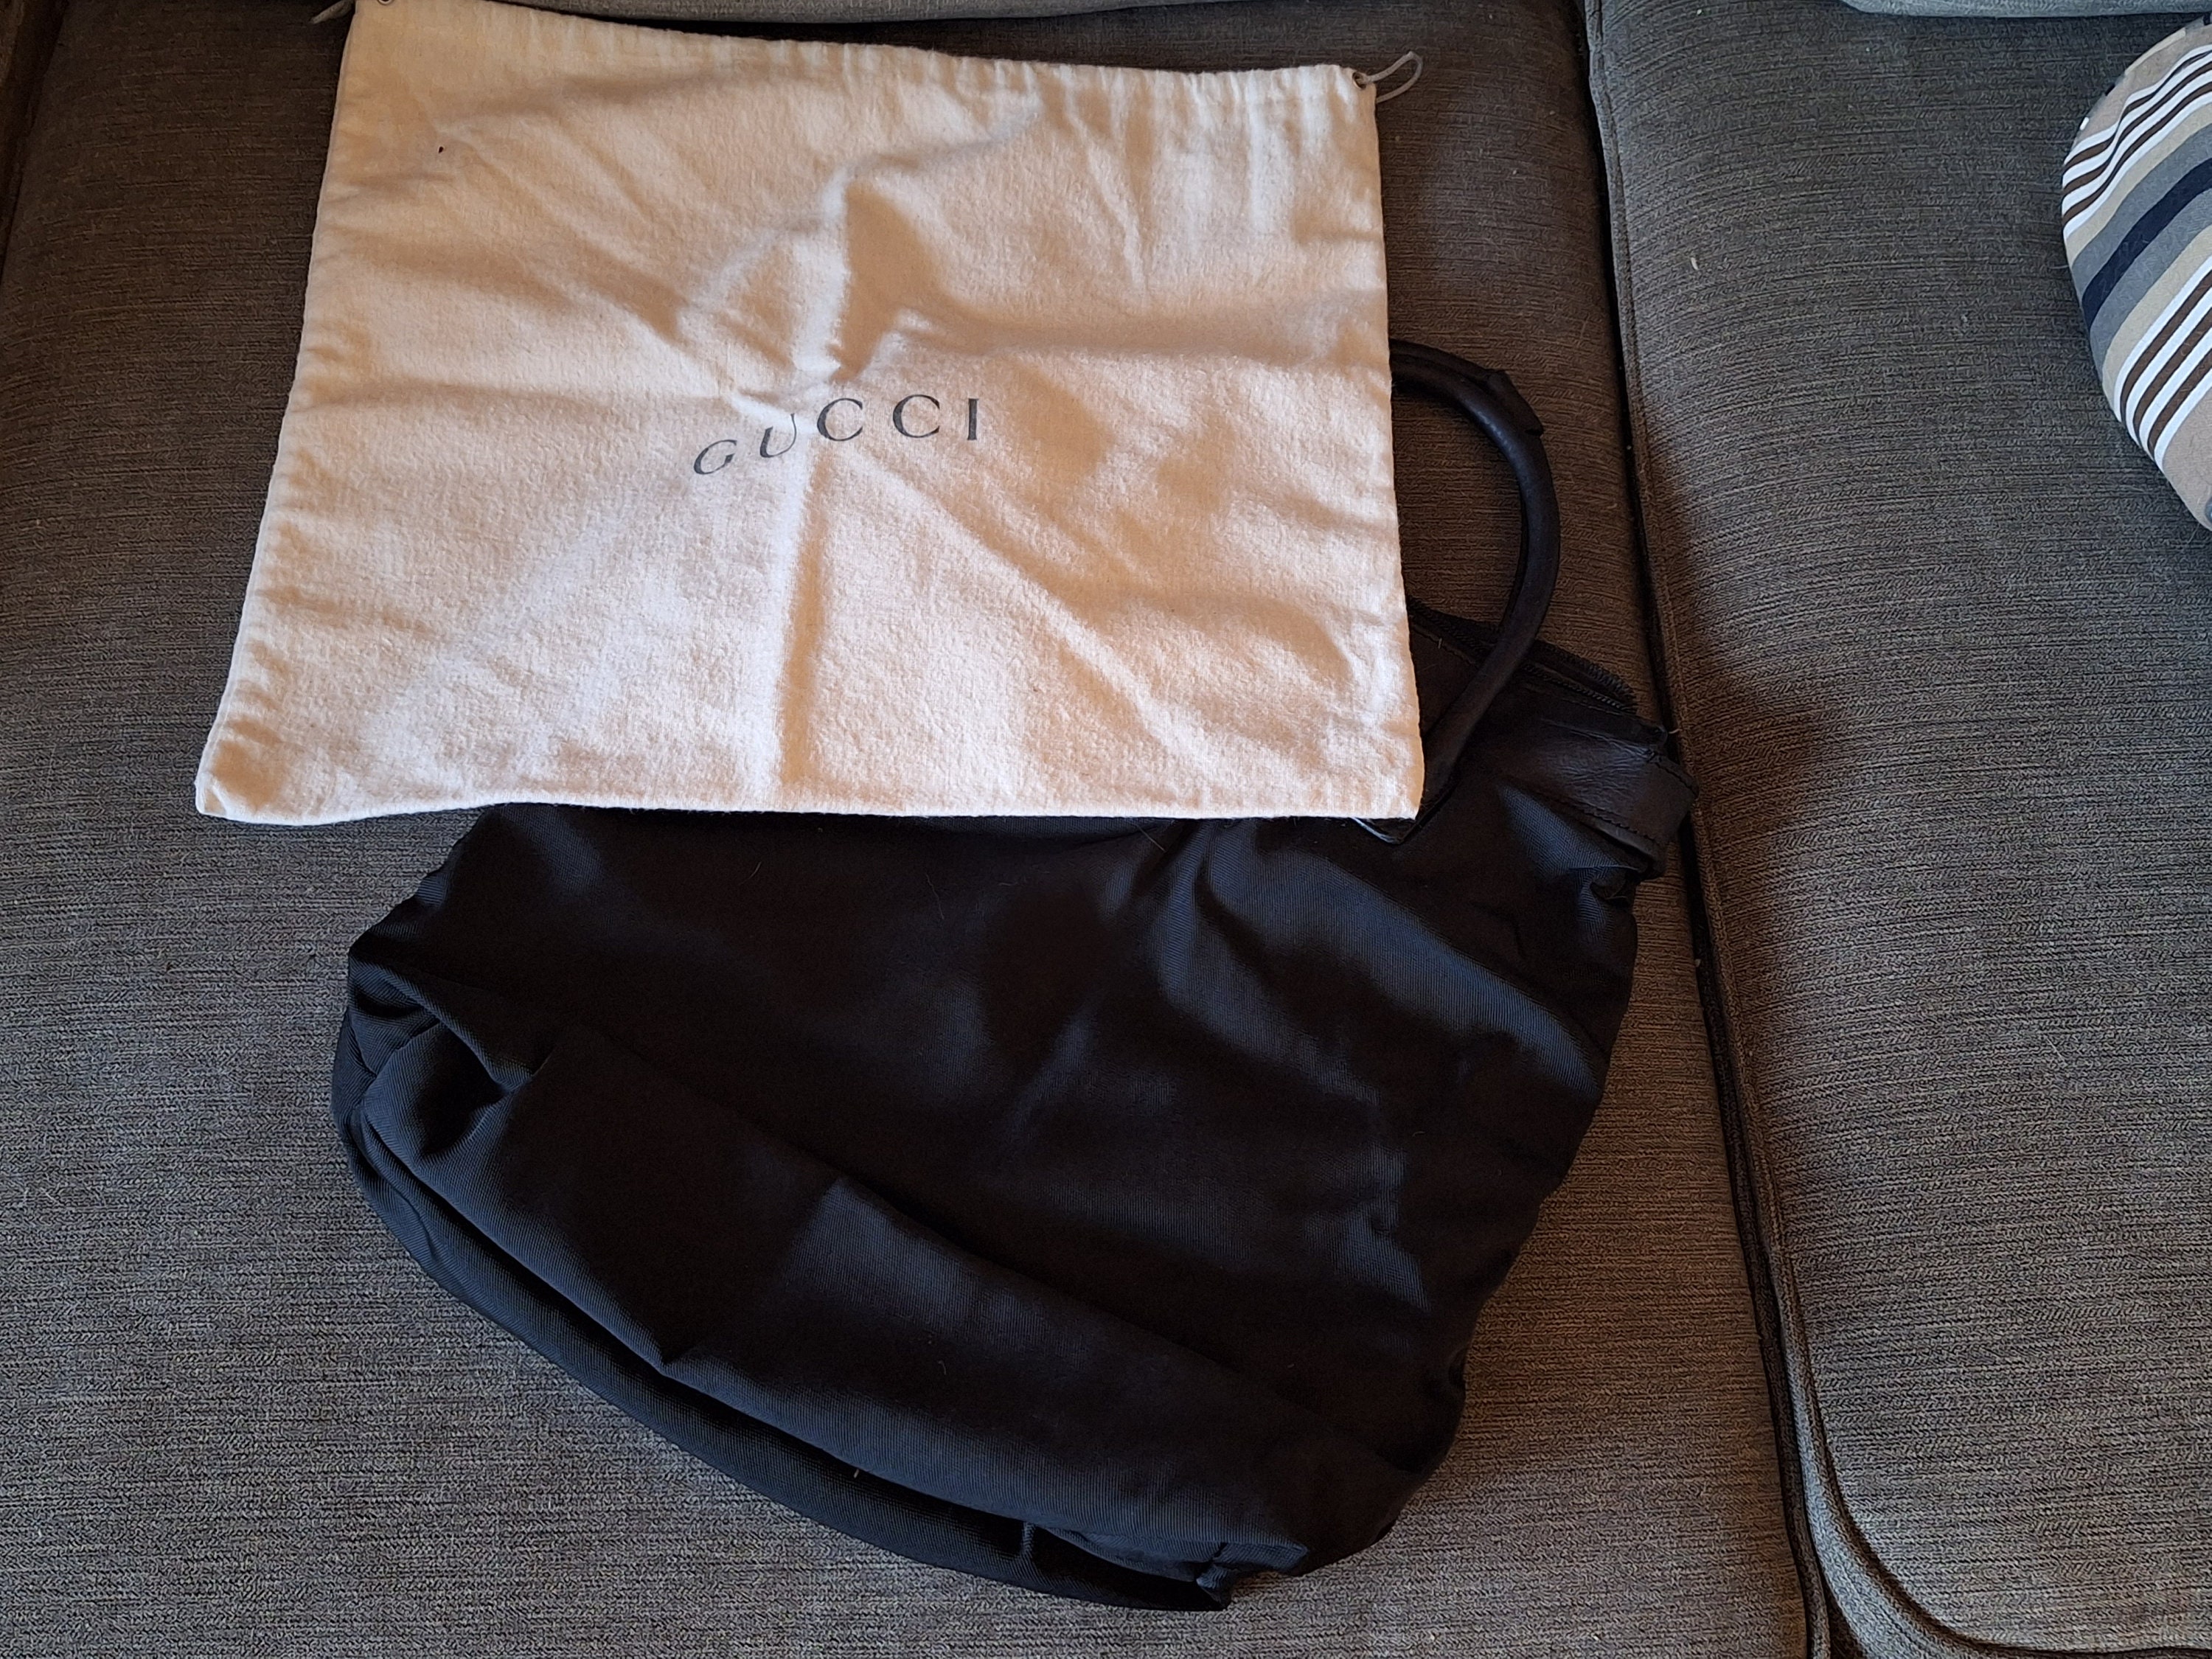 Gucci Dust Bag Cover Drawstring Shoe Storage Travel Bags Set Of 2